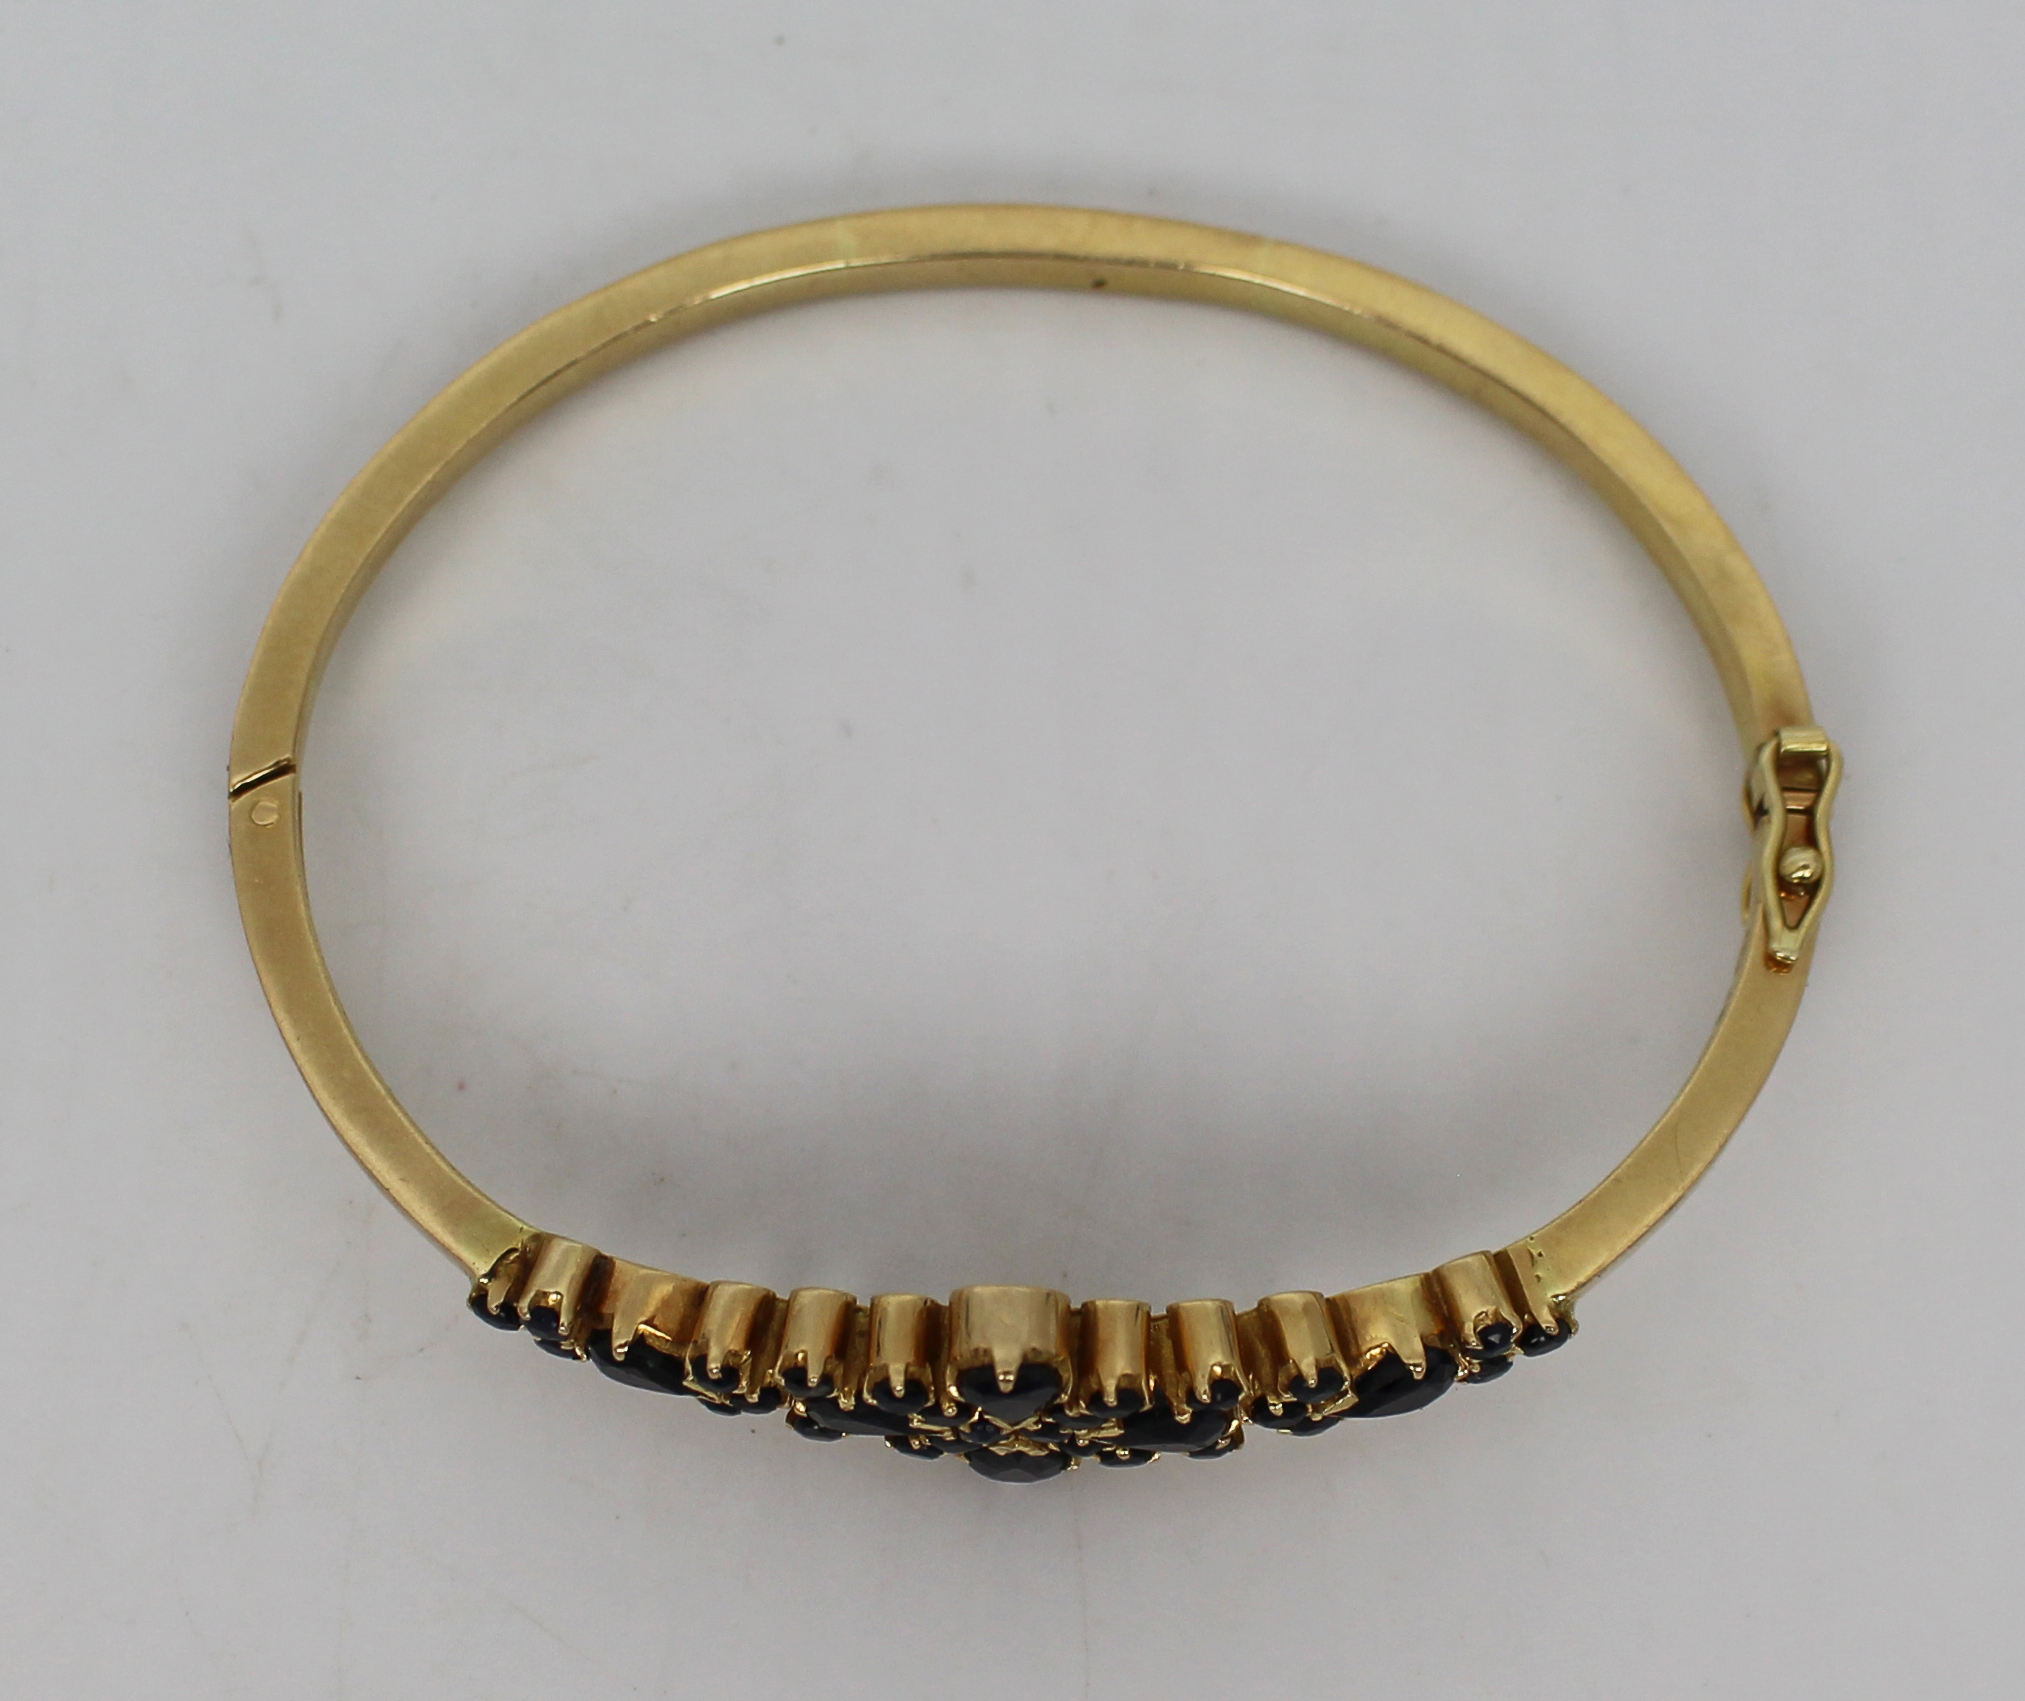 Russian Sapphire 18ct Gold Bracelet - Image 2 of 4